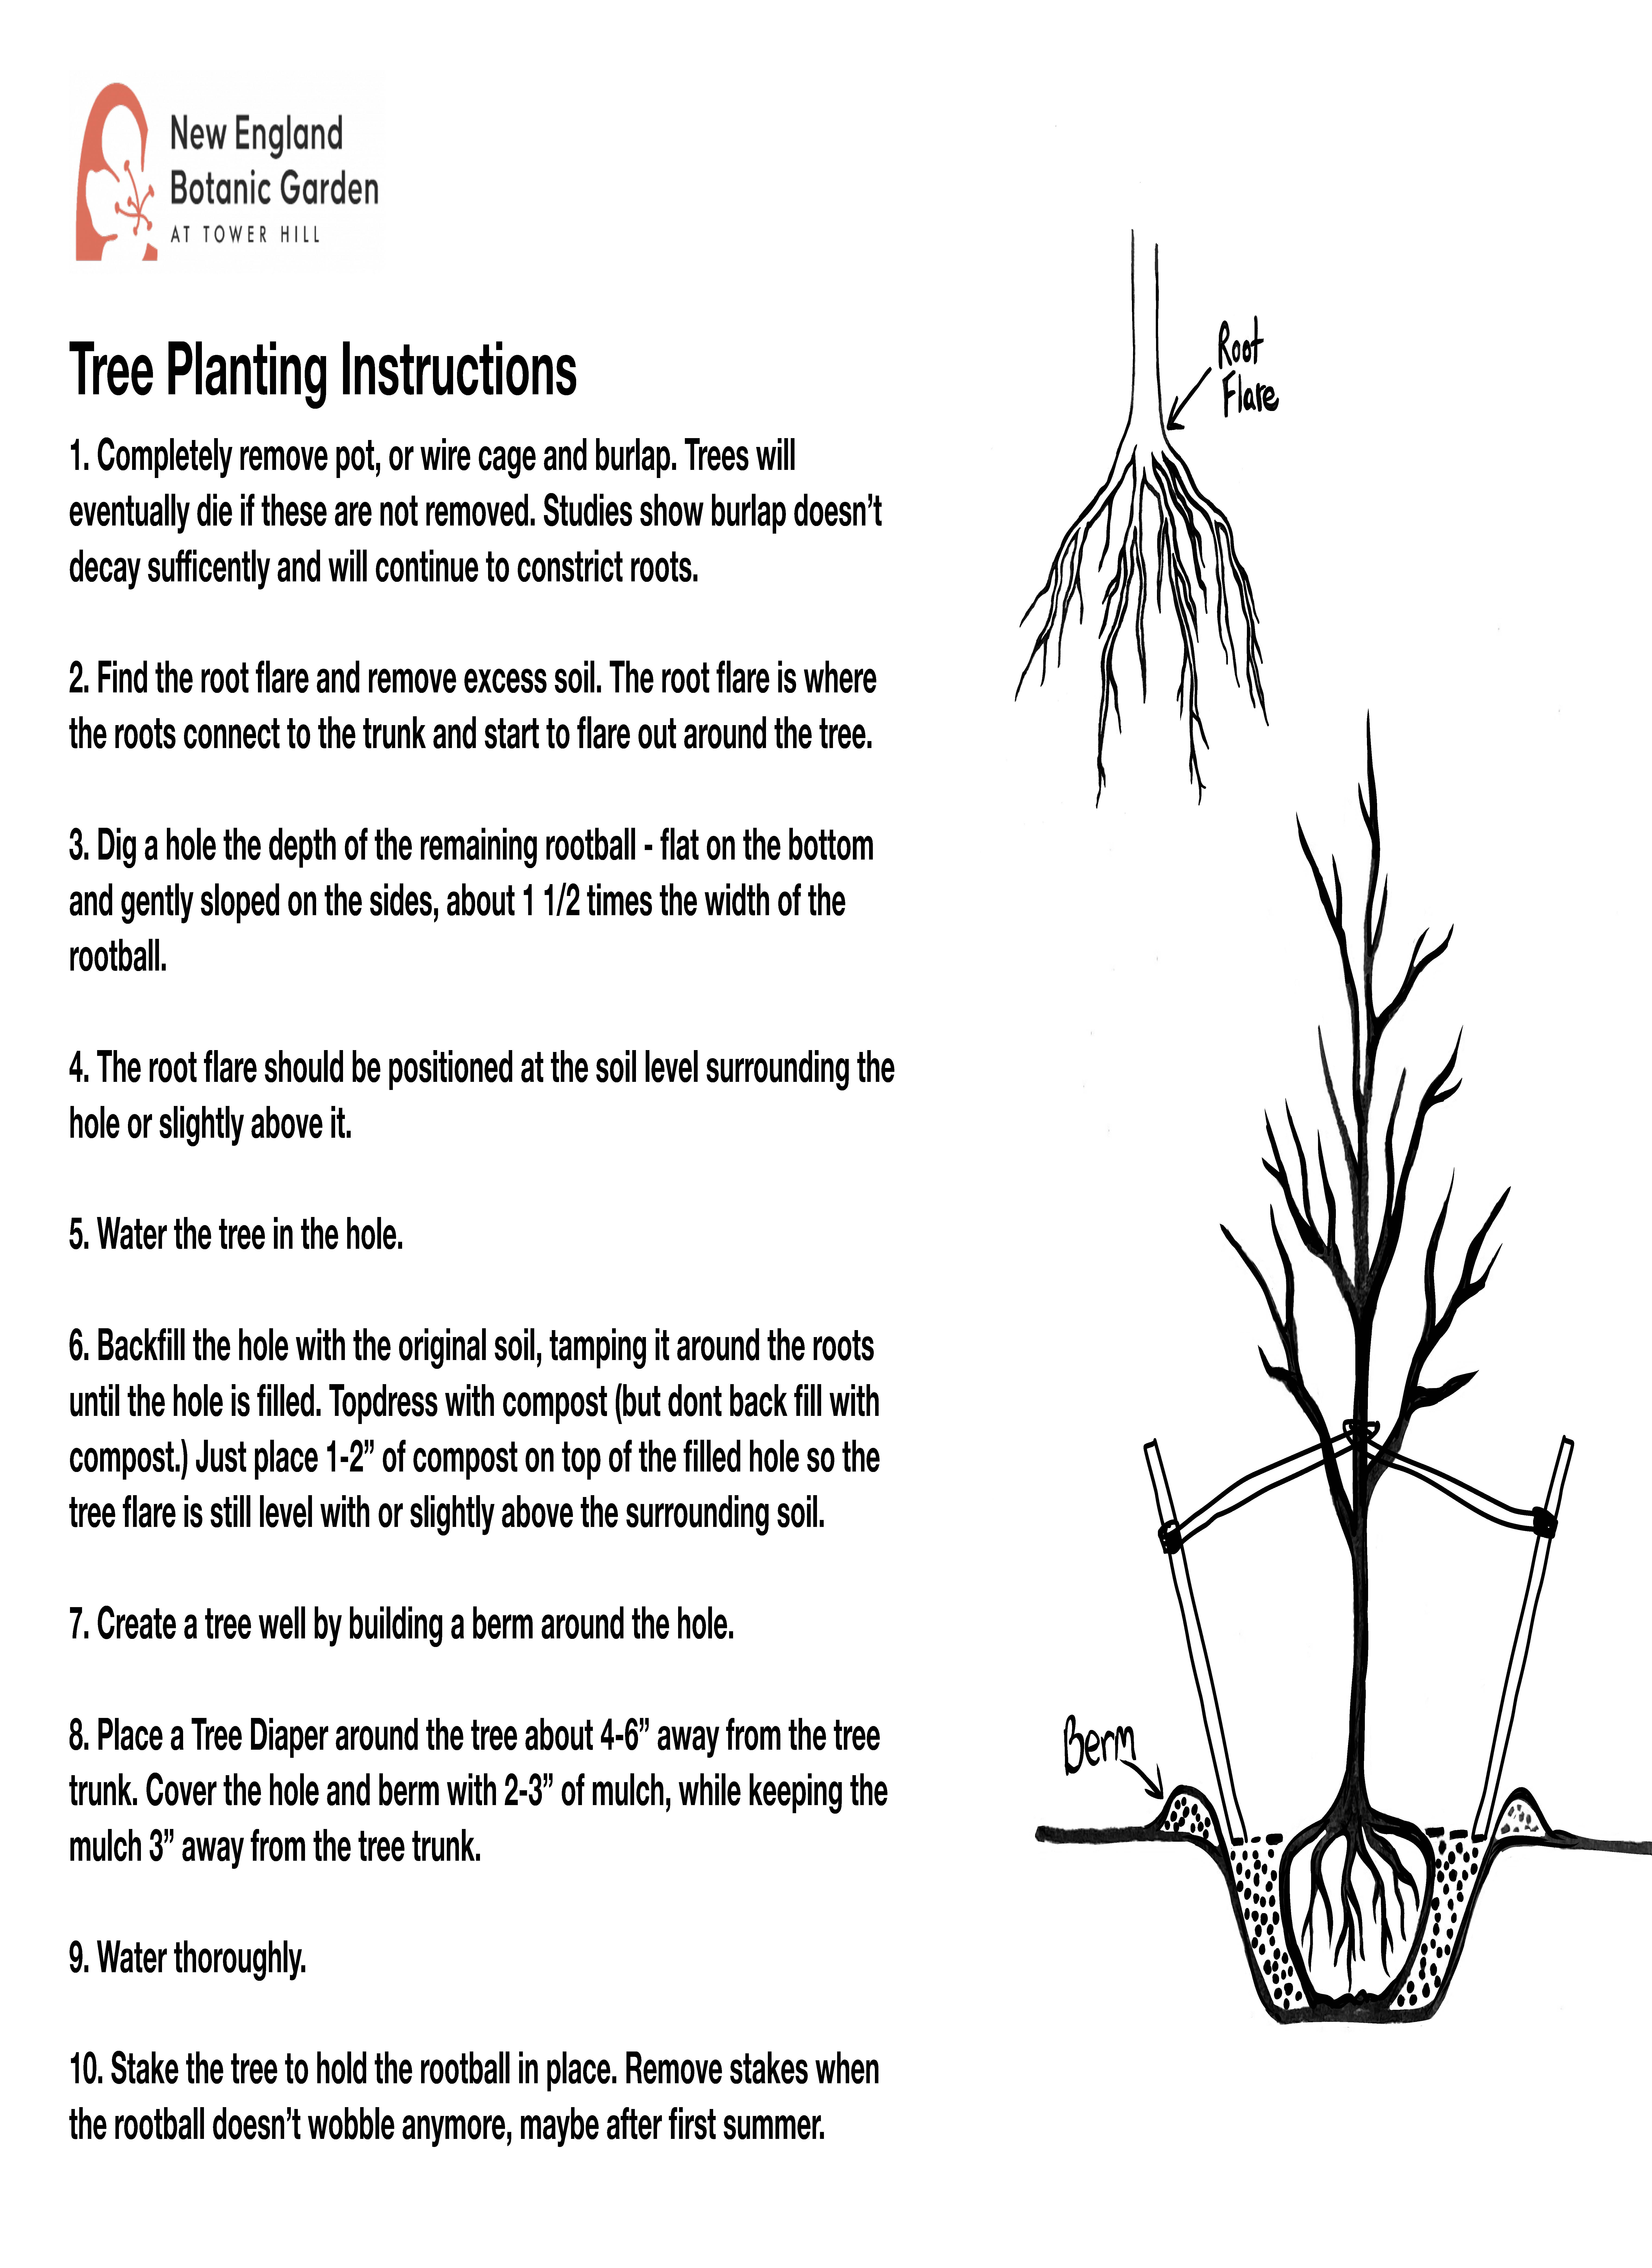 An image that describes in steps how to plant a tree.